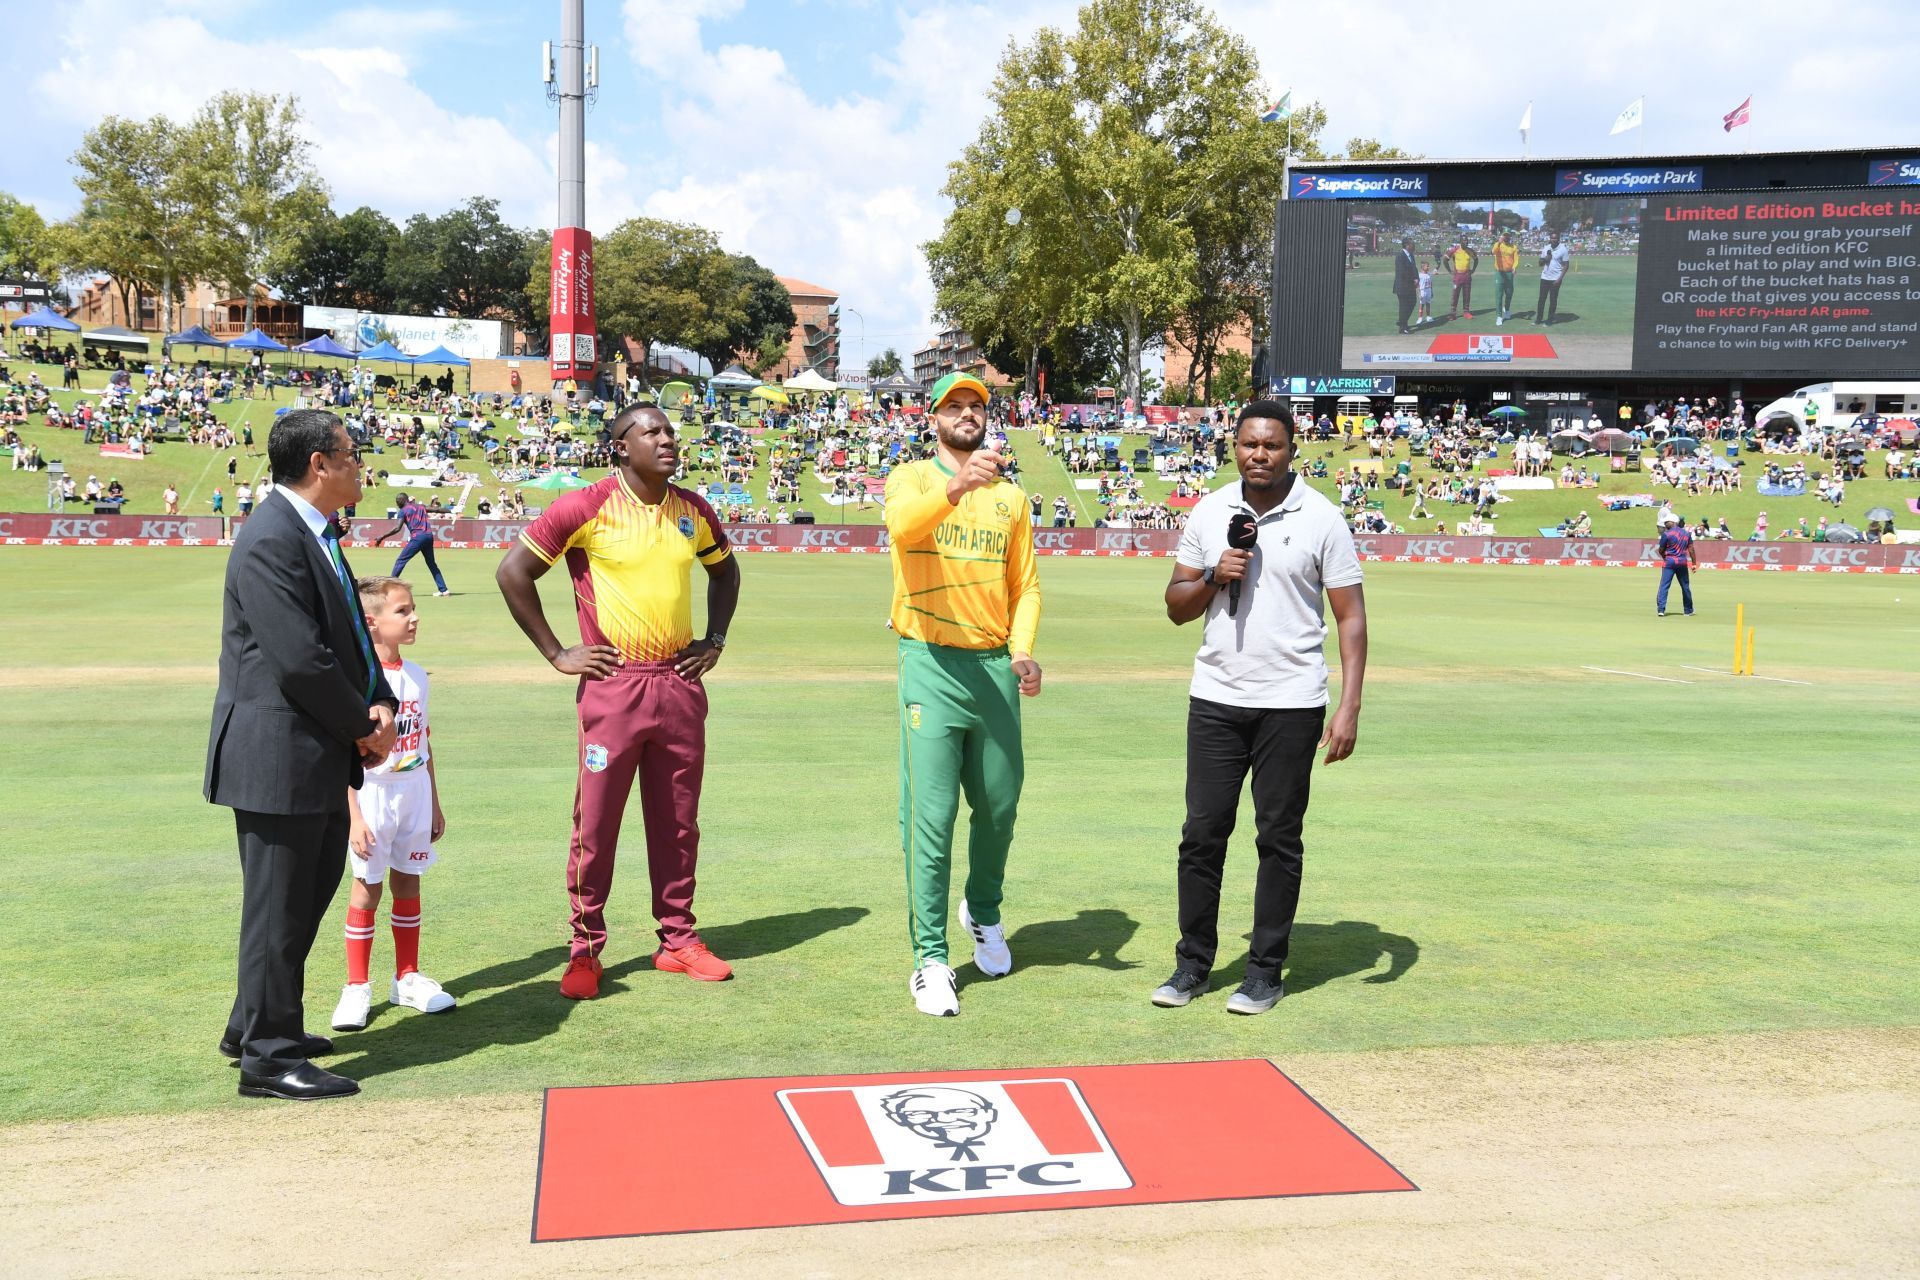 South Africa v West Indies - 2nd T20 International